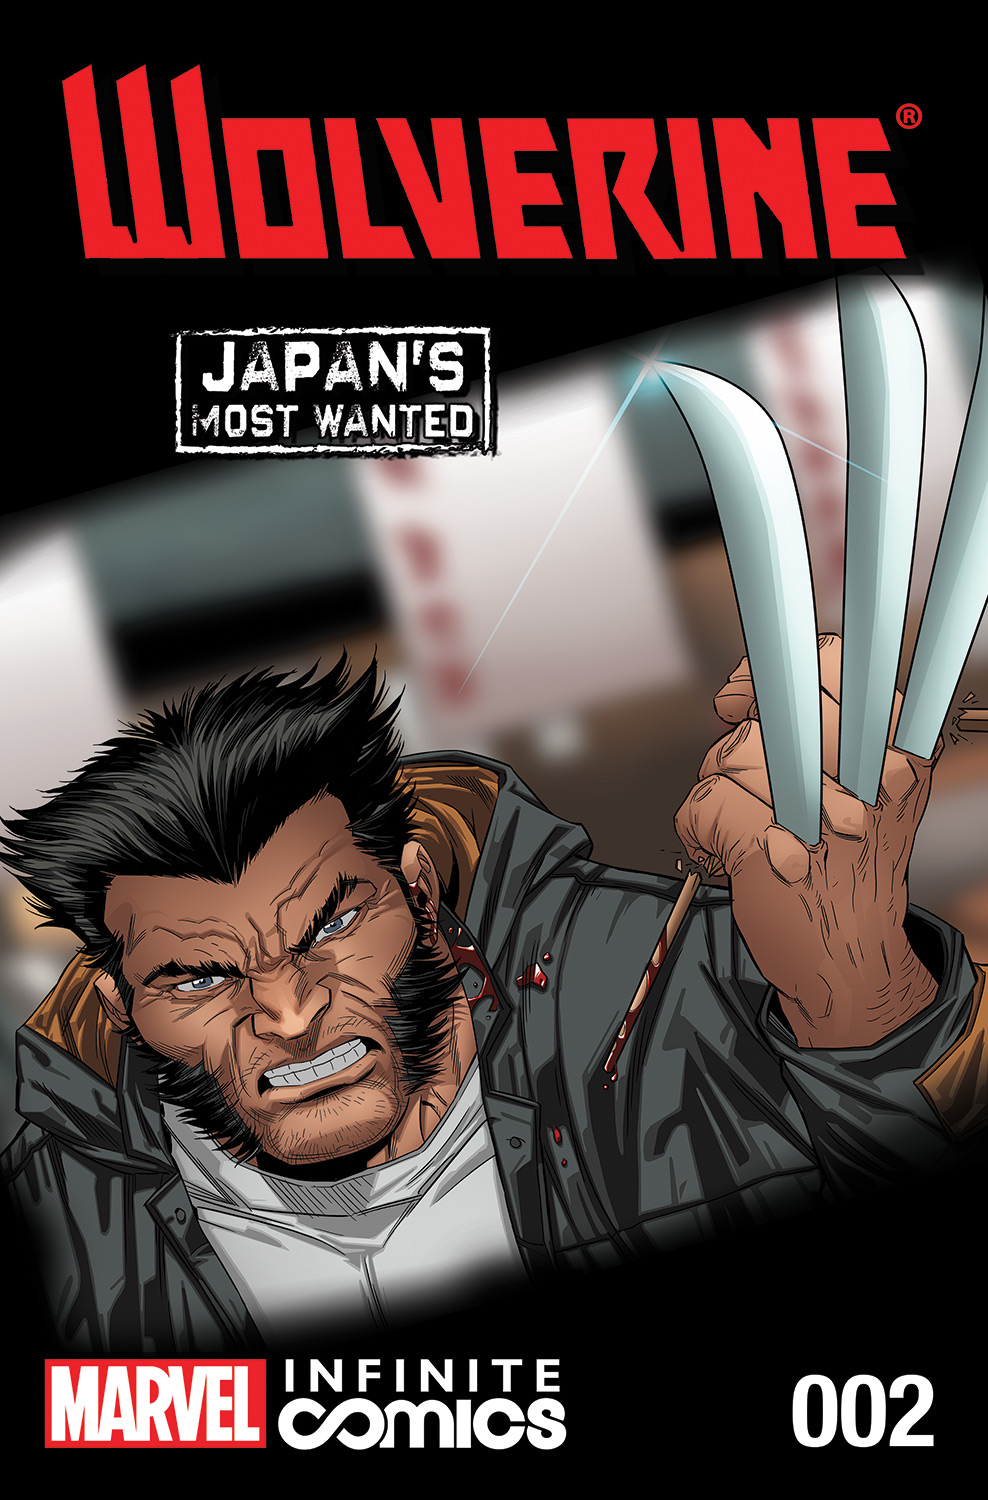 Wolverine: Japan's Most Wanted Infinite Comic (2013) #2